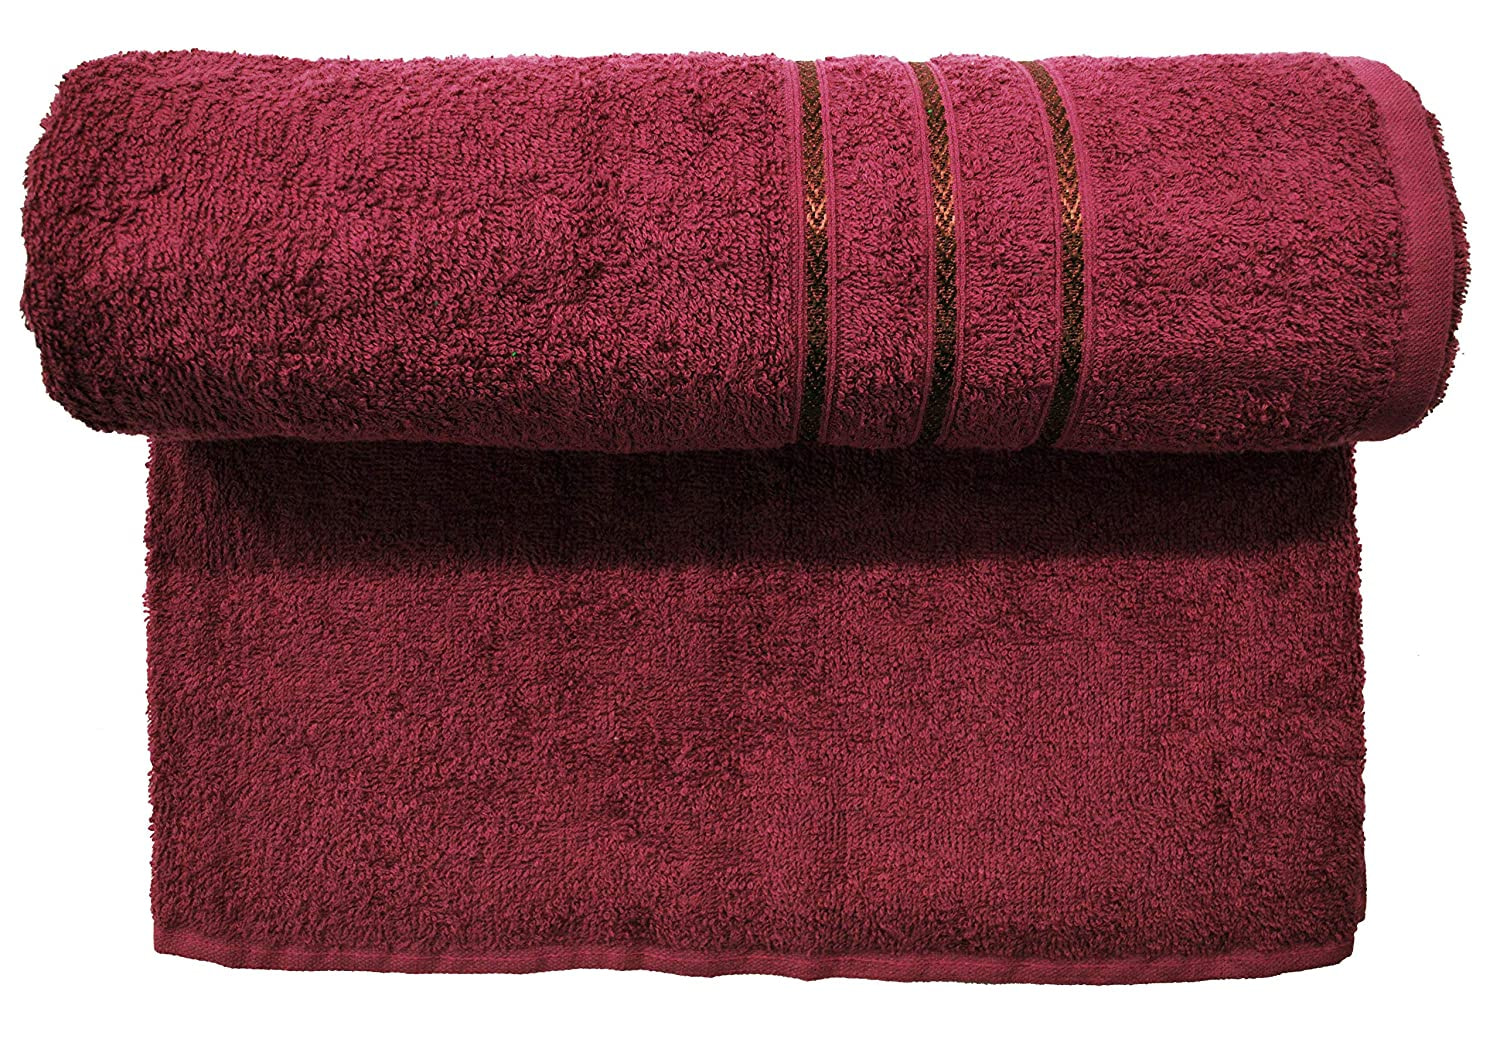 Bombay Dyeing Flora 400 GSM Maroon Towel